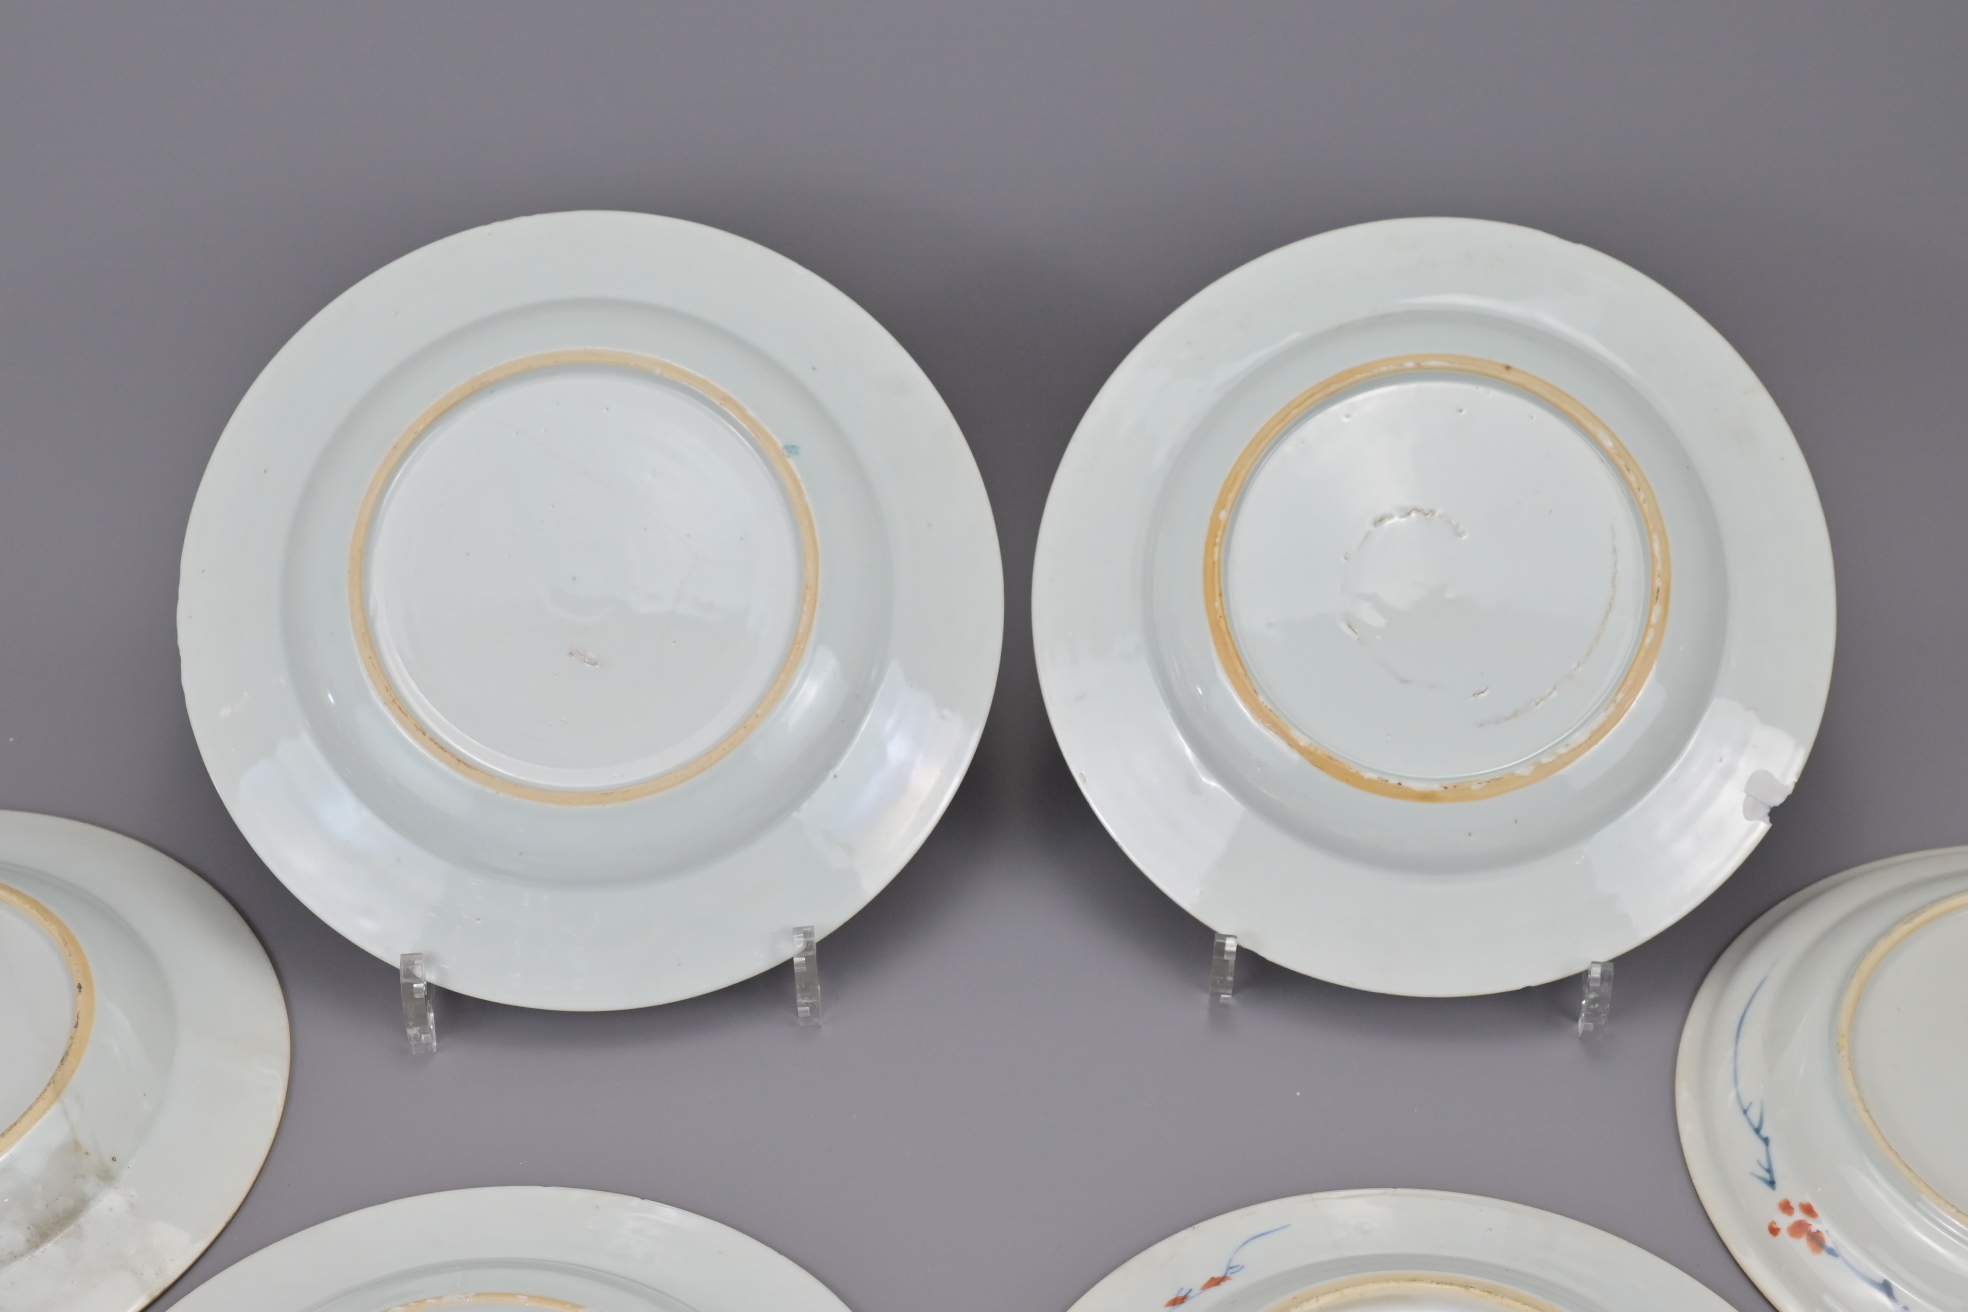 SIX CHINESE FAMILLE ROSE EXPORT PORCELAIN PLATES - Image 5 of 7